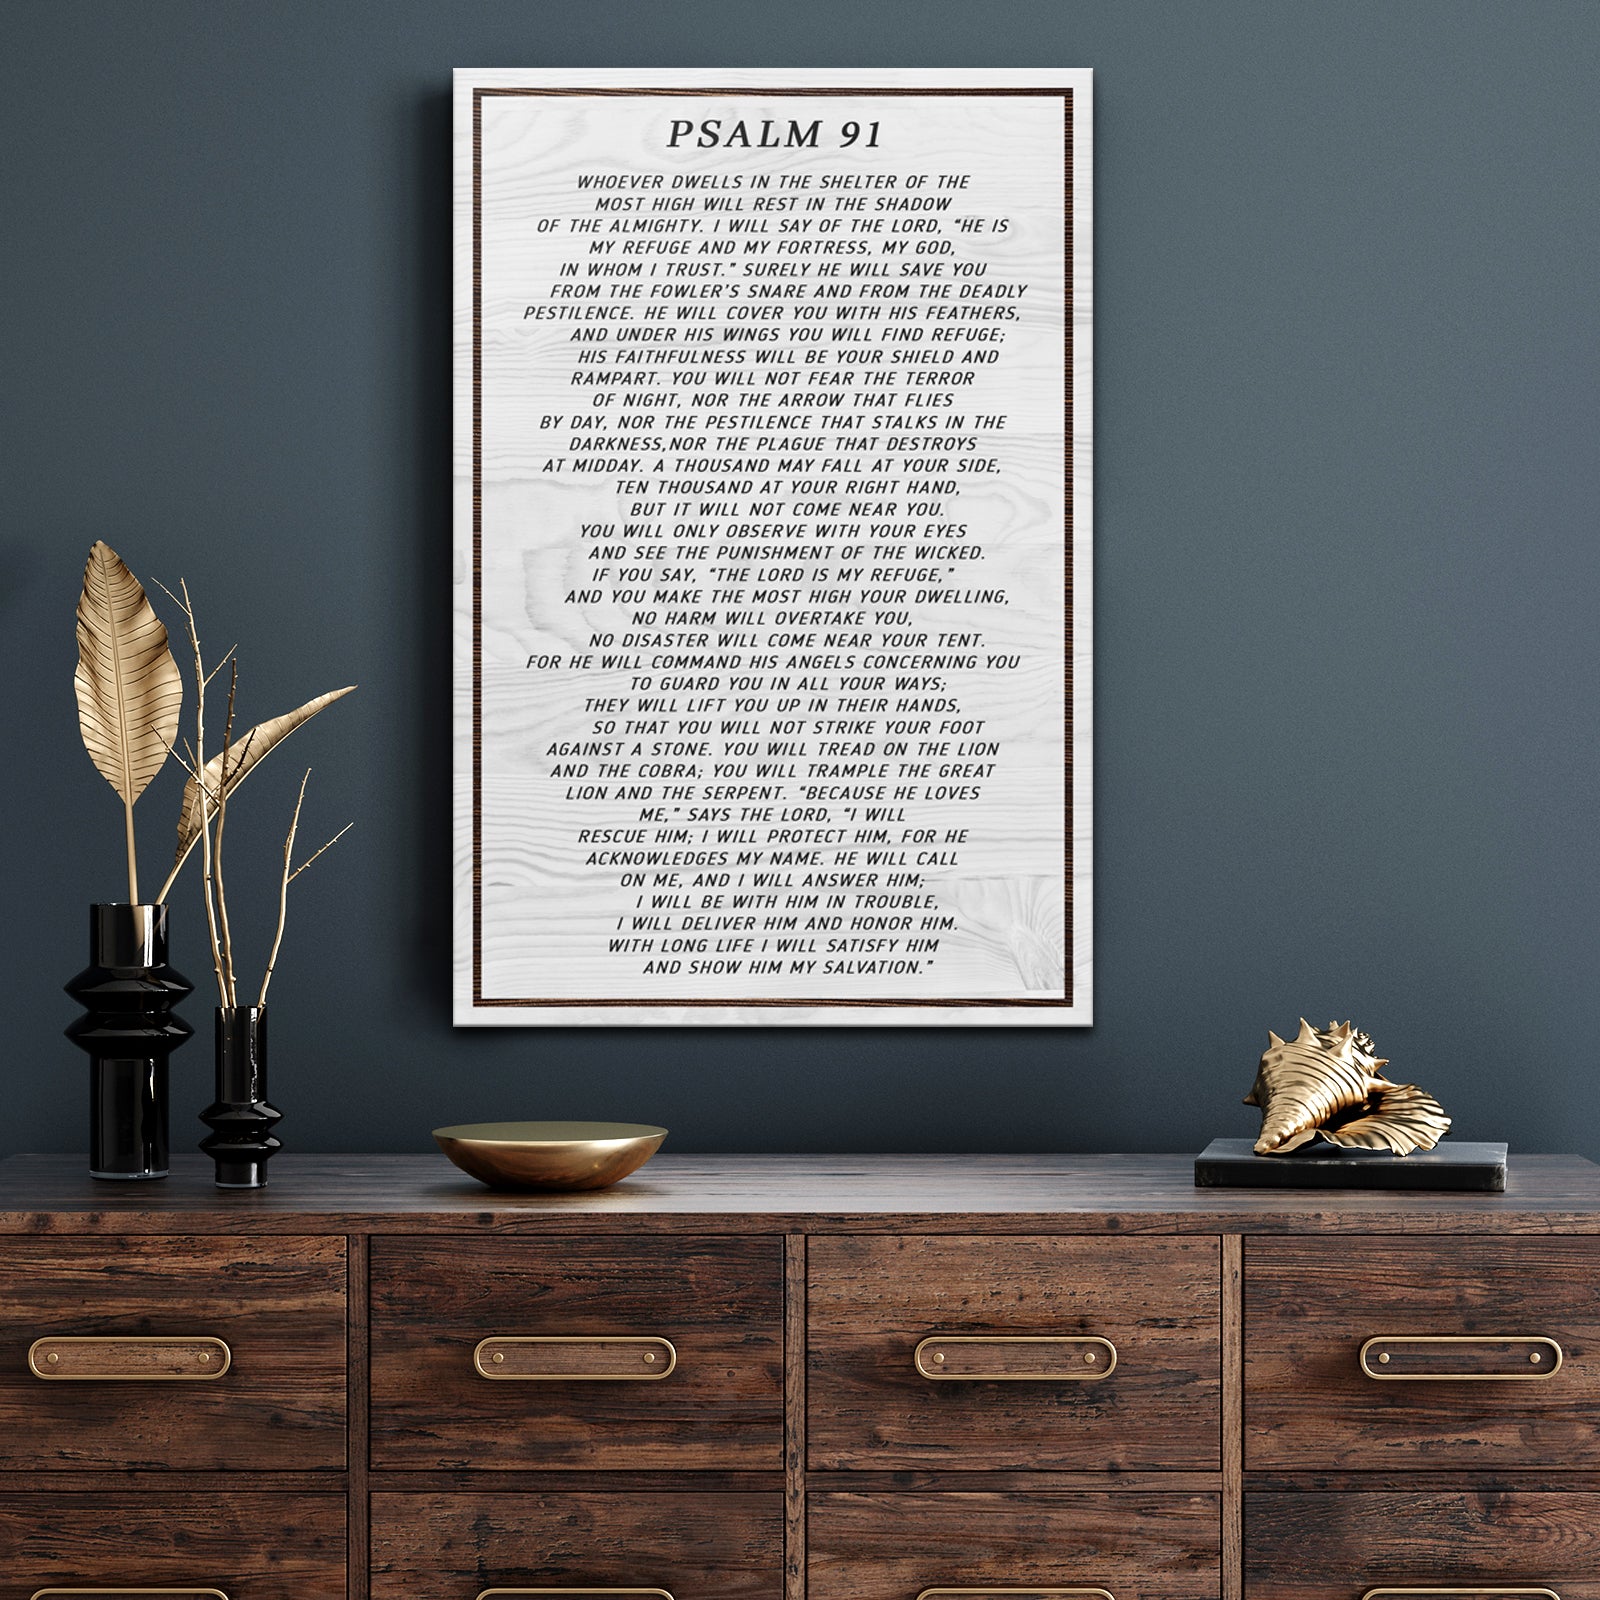 PSALM 91 Whoever dwells in the shelter of the Most High Sign Style 1 - Image by Tailored Canvases